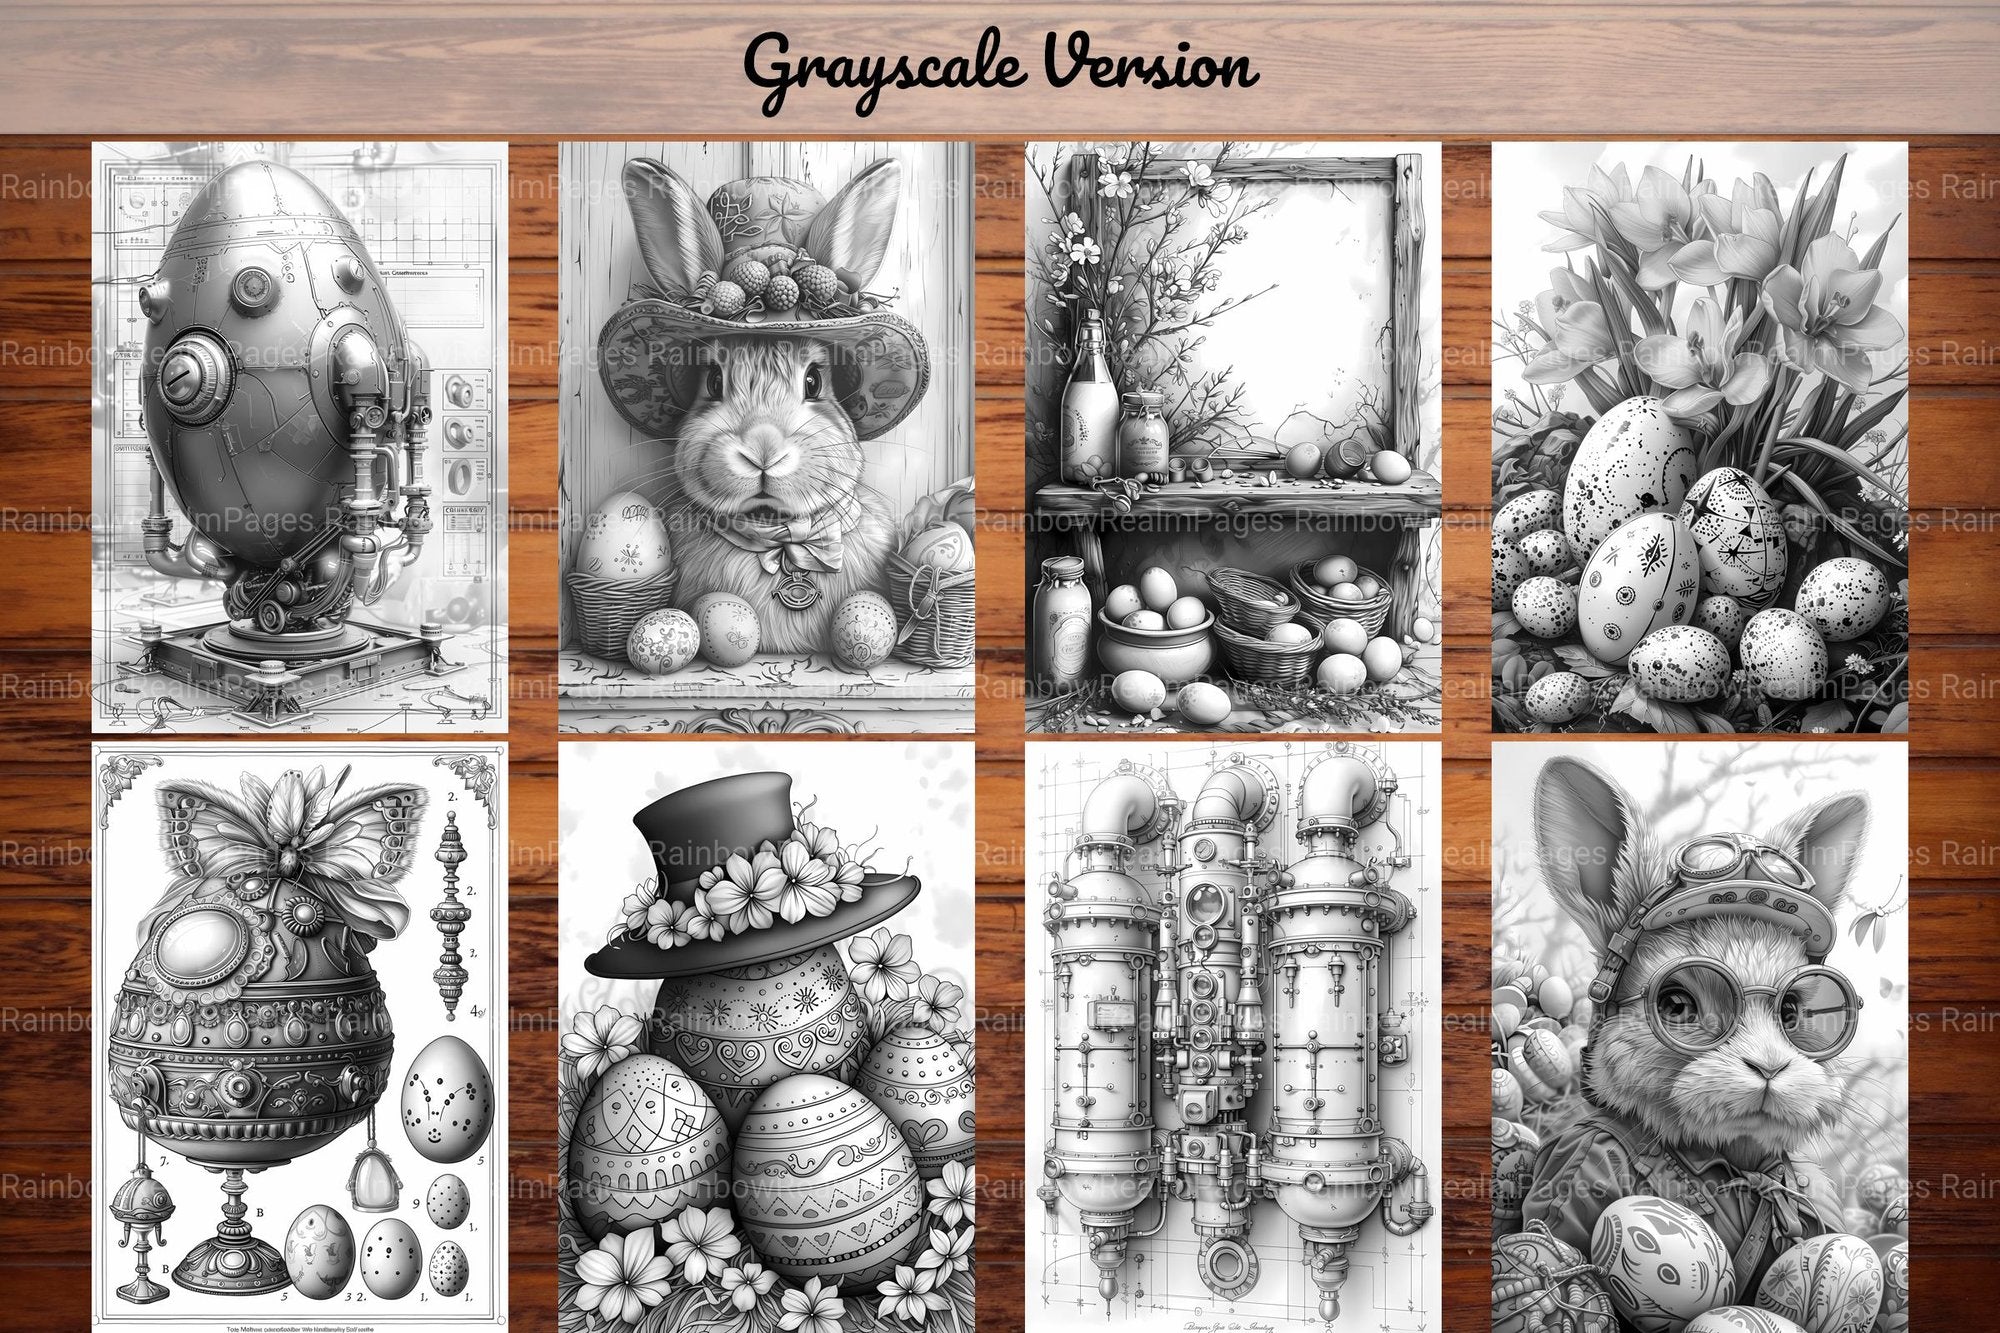 Steampunk Easter Coloring Books - CraftNest